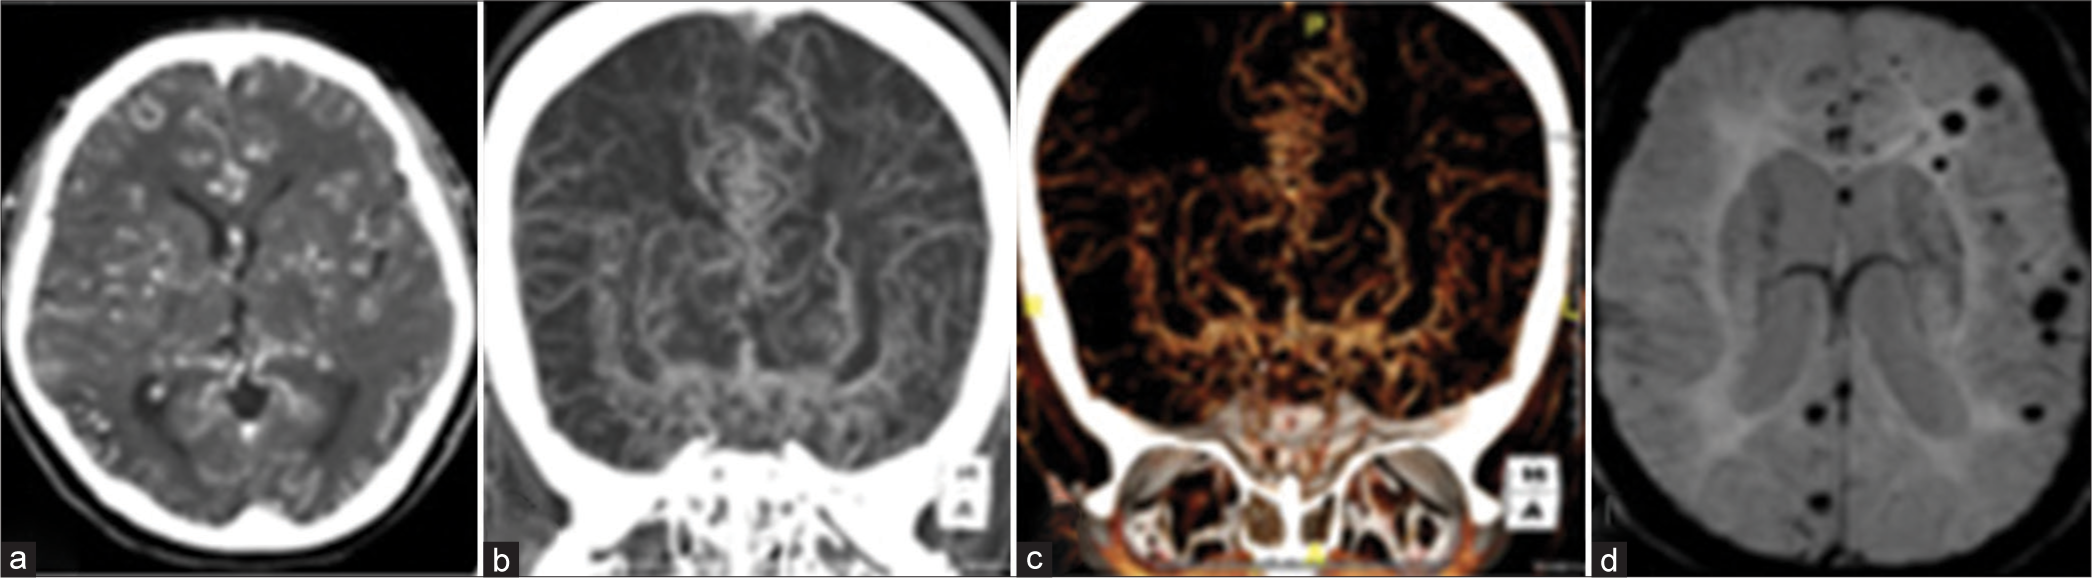 (a-c) Computed tomography angiogram of a 41-year-old female patient reveals extensive collateral formation throughout the cerebral parenchyma with severe narrowing of the terminal internal carotid arteries. (d) Susceptibility-weighted imaging revealed multiple tiny chronic hemorrhages. The patient was diagnosed with primary Moyamoya disease.